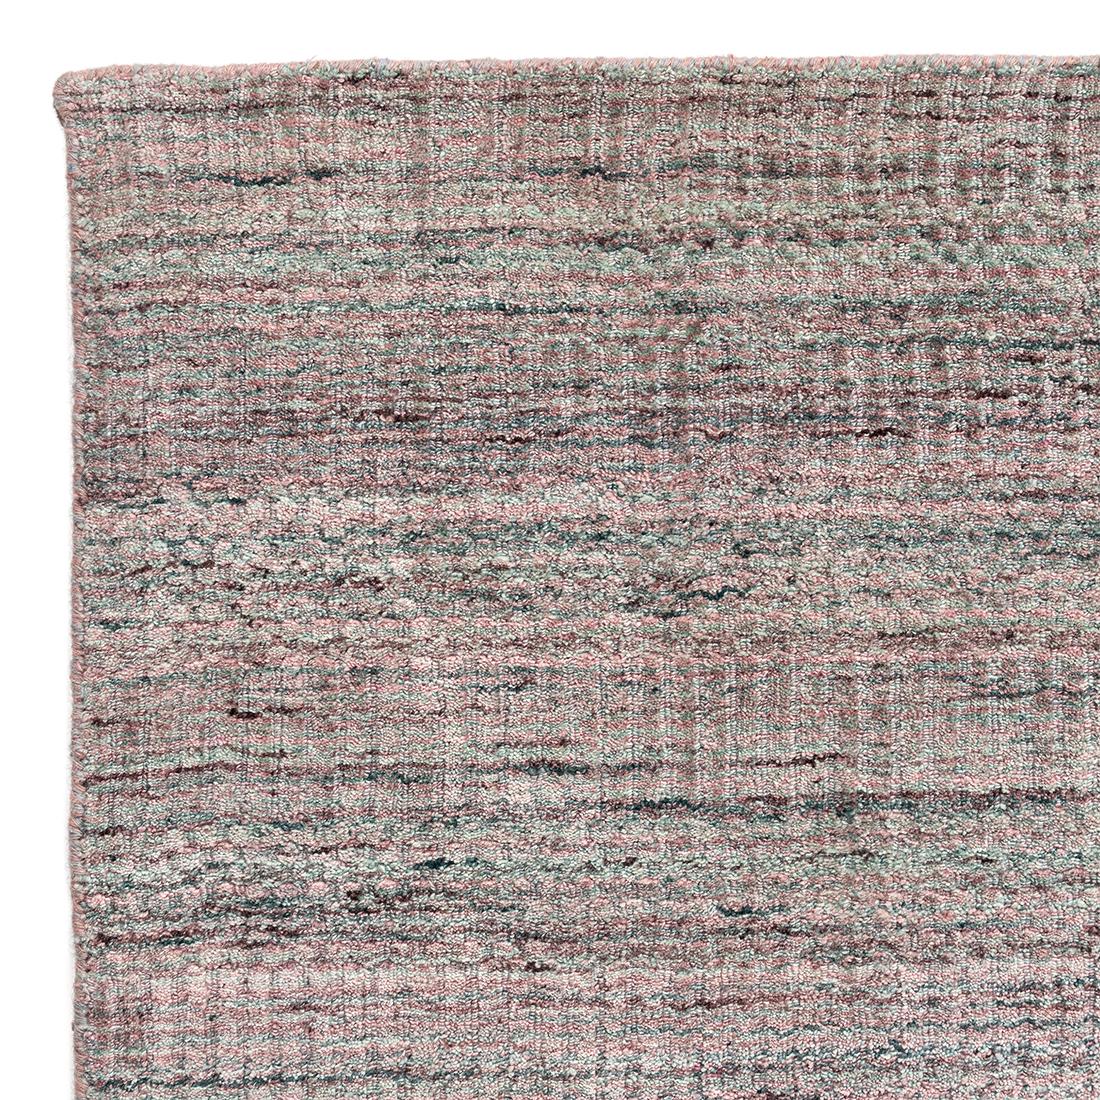 Simplicity pink turquoise contemporary handwoven Rug, 10' x 14'. We call this our “Simplicity” Line, but a closer look reveals that it is not so simple. Yes, we have eliminated borders, yes the pattern is infinite, yes it is purely geometric. But